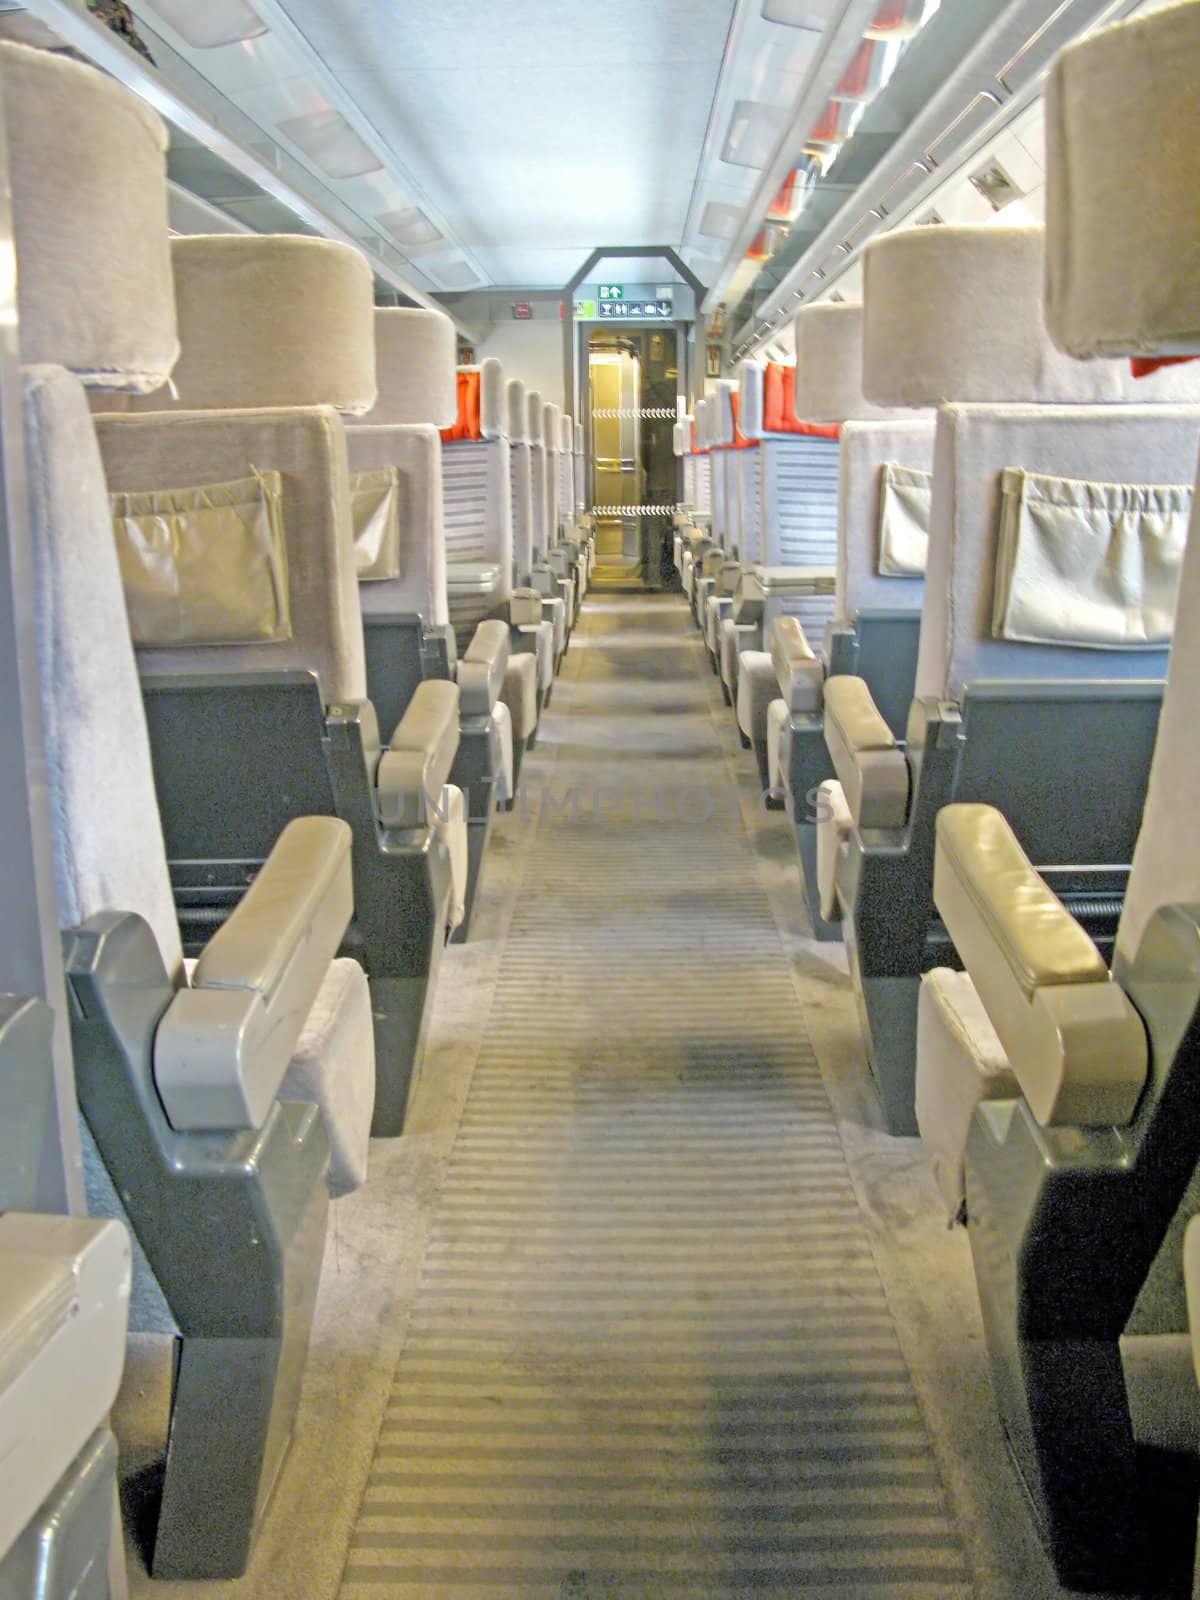 An aisle of a train with a lot of seats.